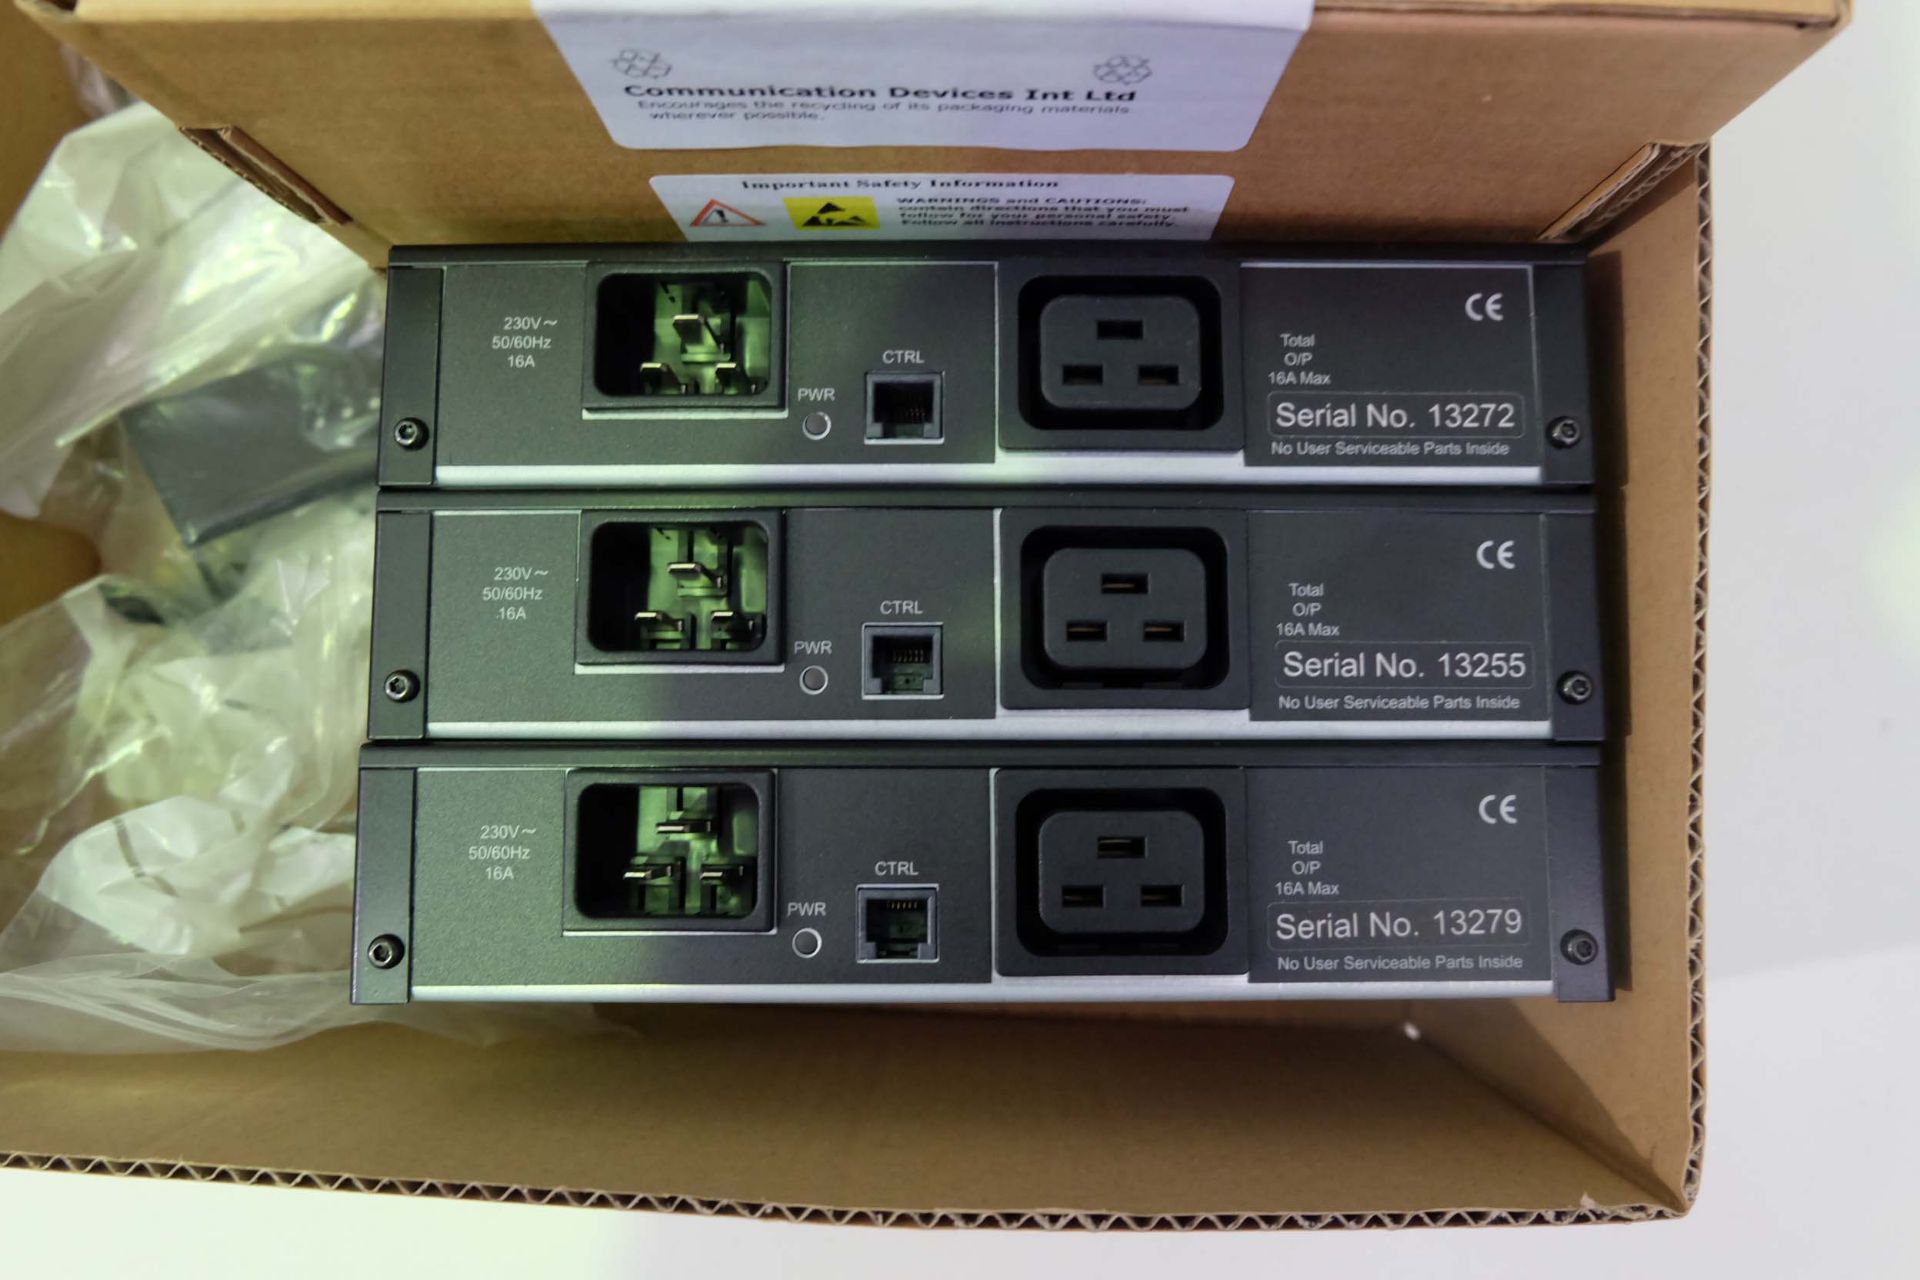 6 x Sure Power -MSPM - 16 Power Packs With 16 Amp Circuit Breaker - Image 3 of 5